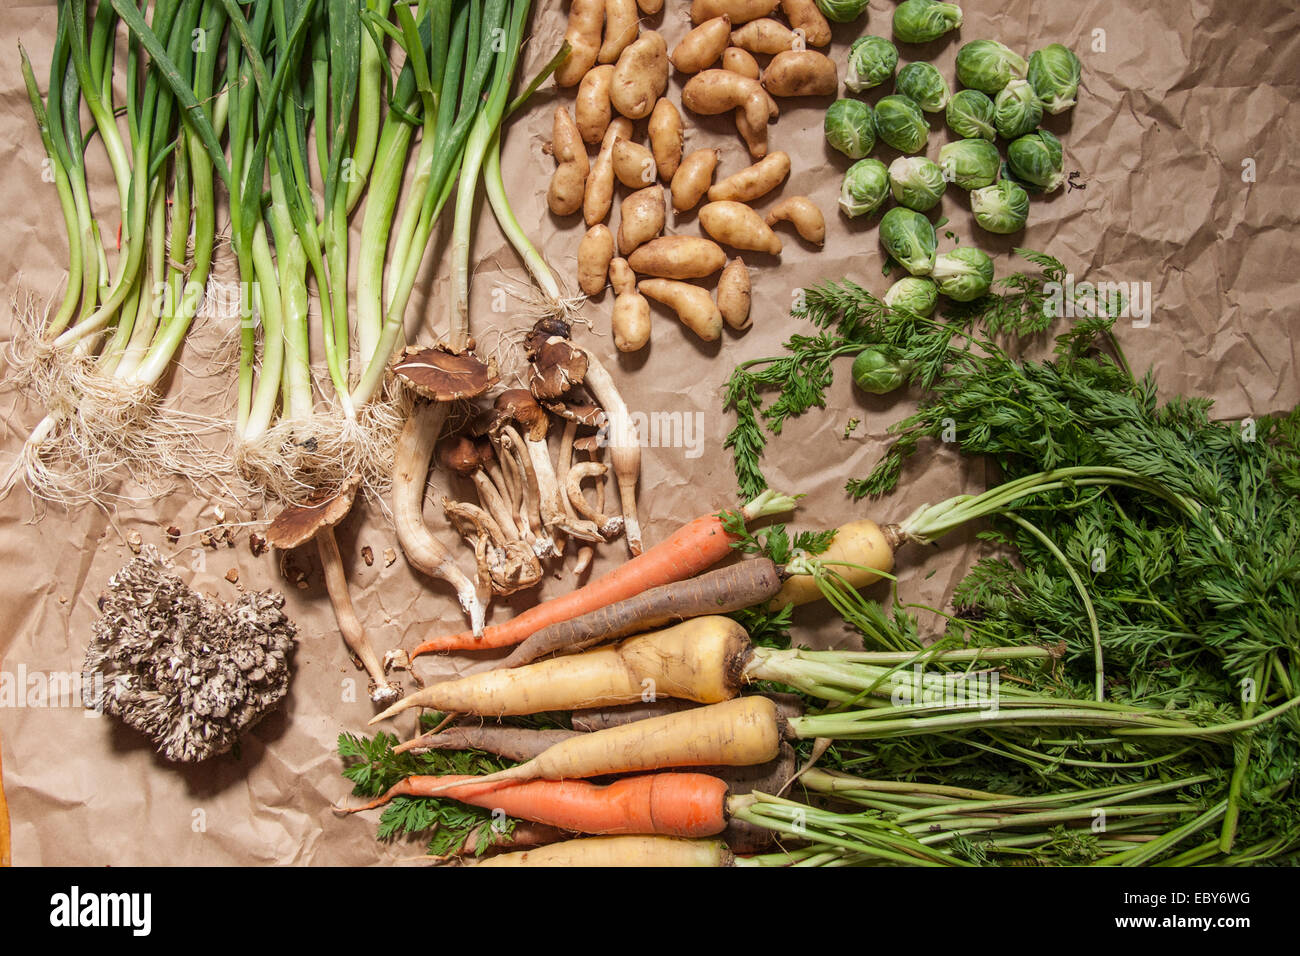 Scallions, carrots, potatoes, brussels sprouts and mushrooms from the farmers' market at Brooklyn's Grand Army Plaza. Stock Photo